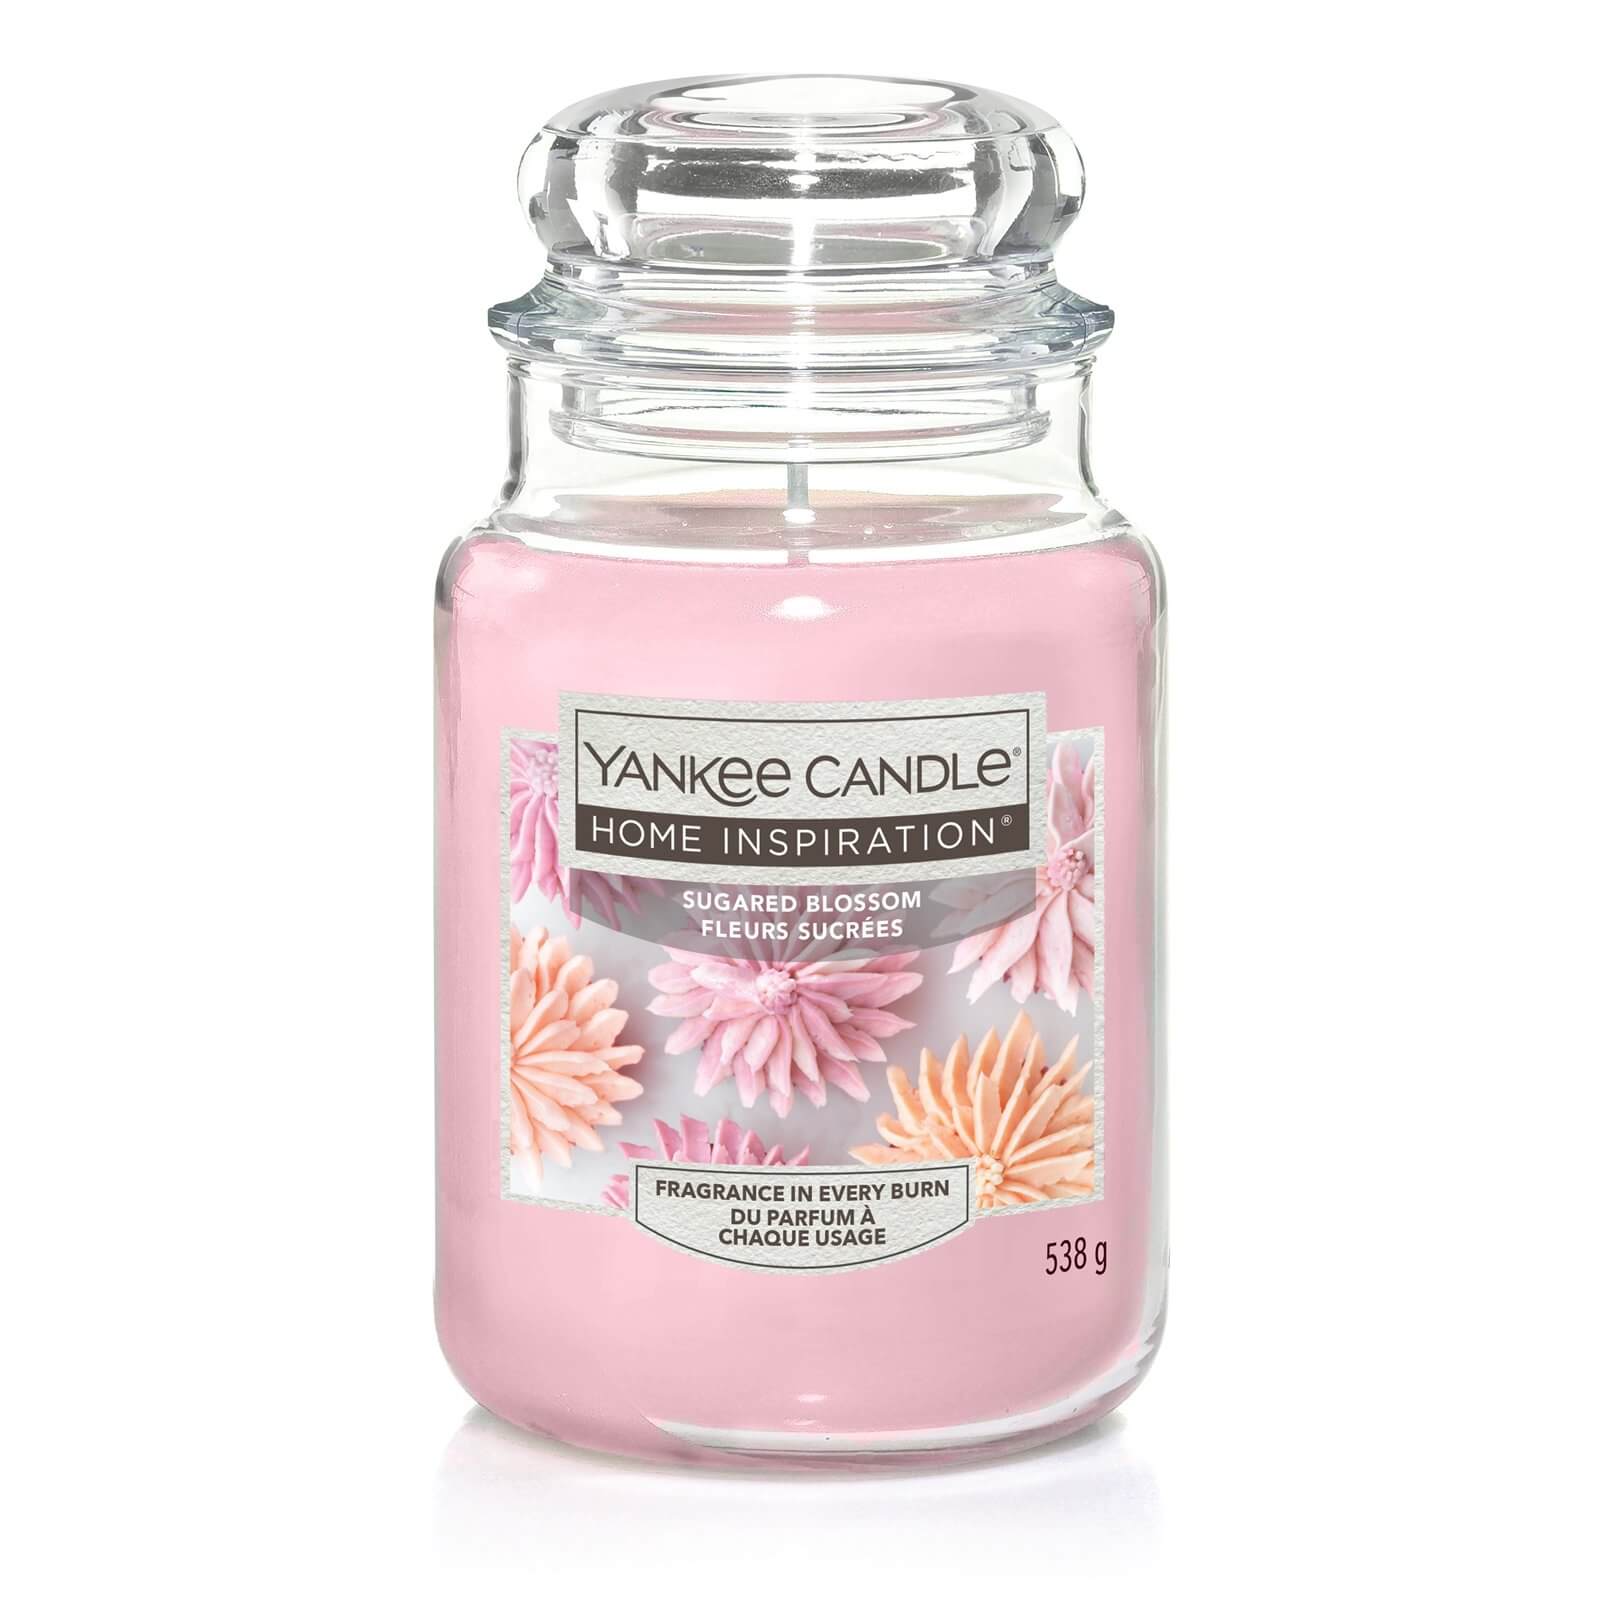 Yankee Candle Home Inspiration Scented Candle - Large Jar - Sugared Blossom